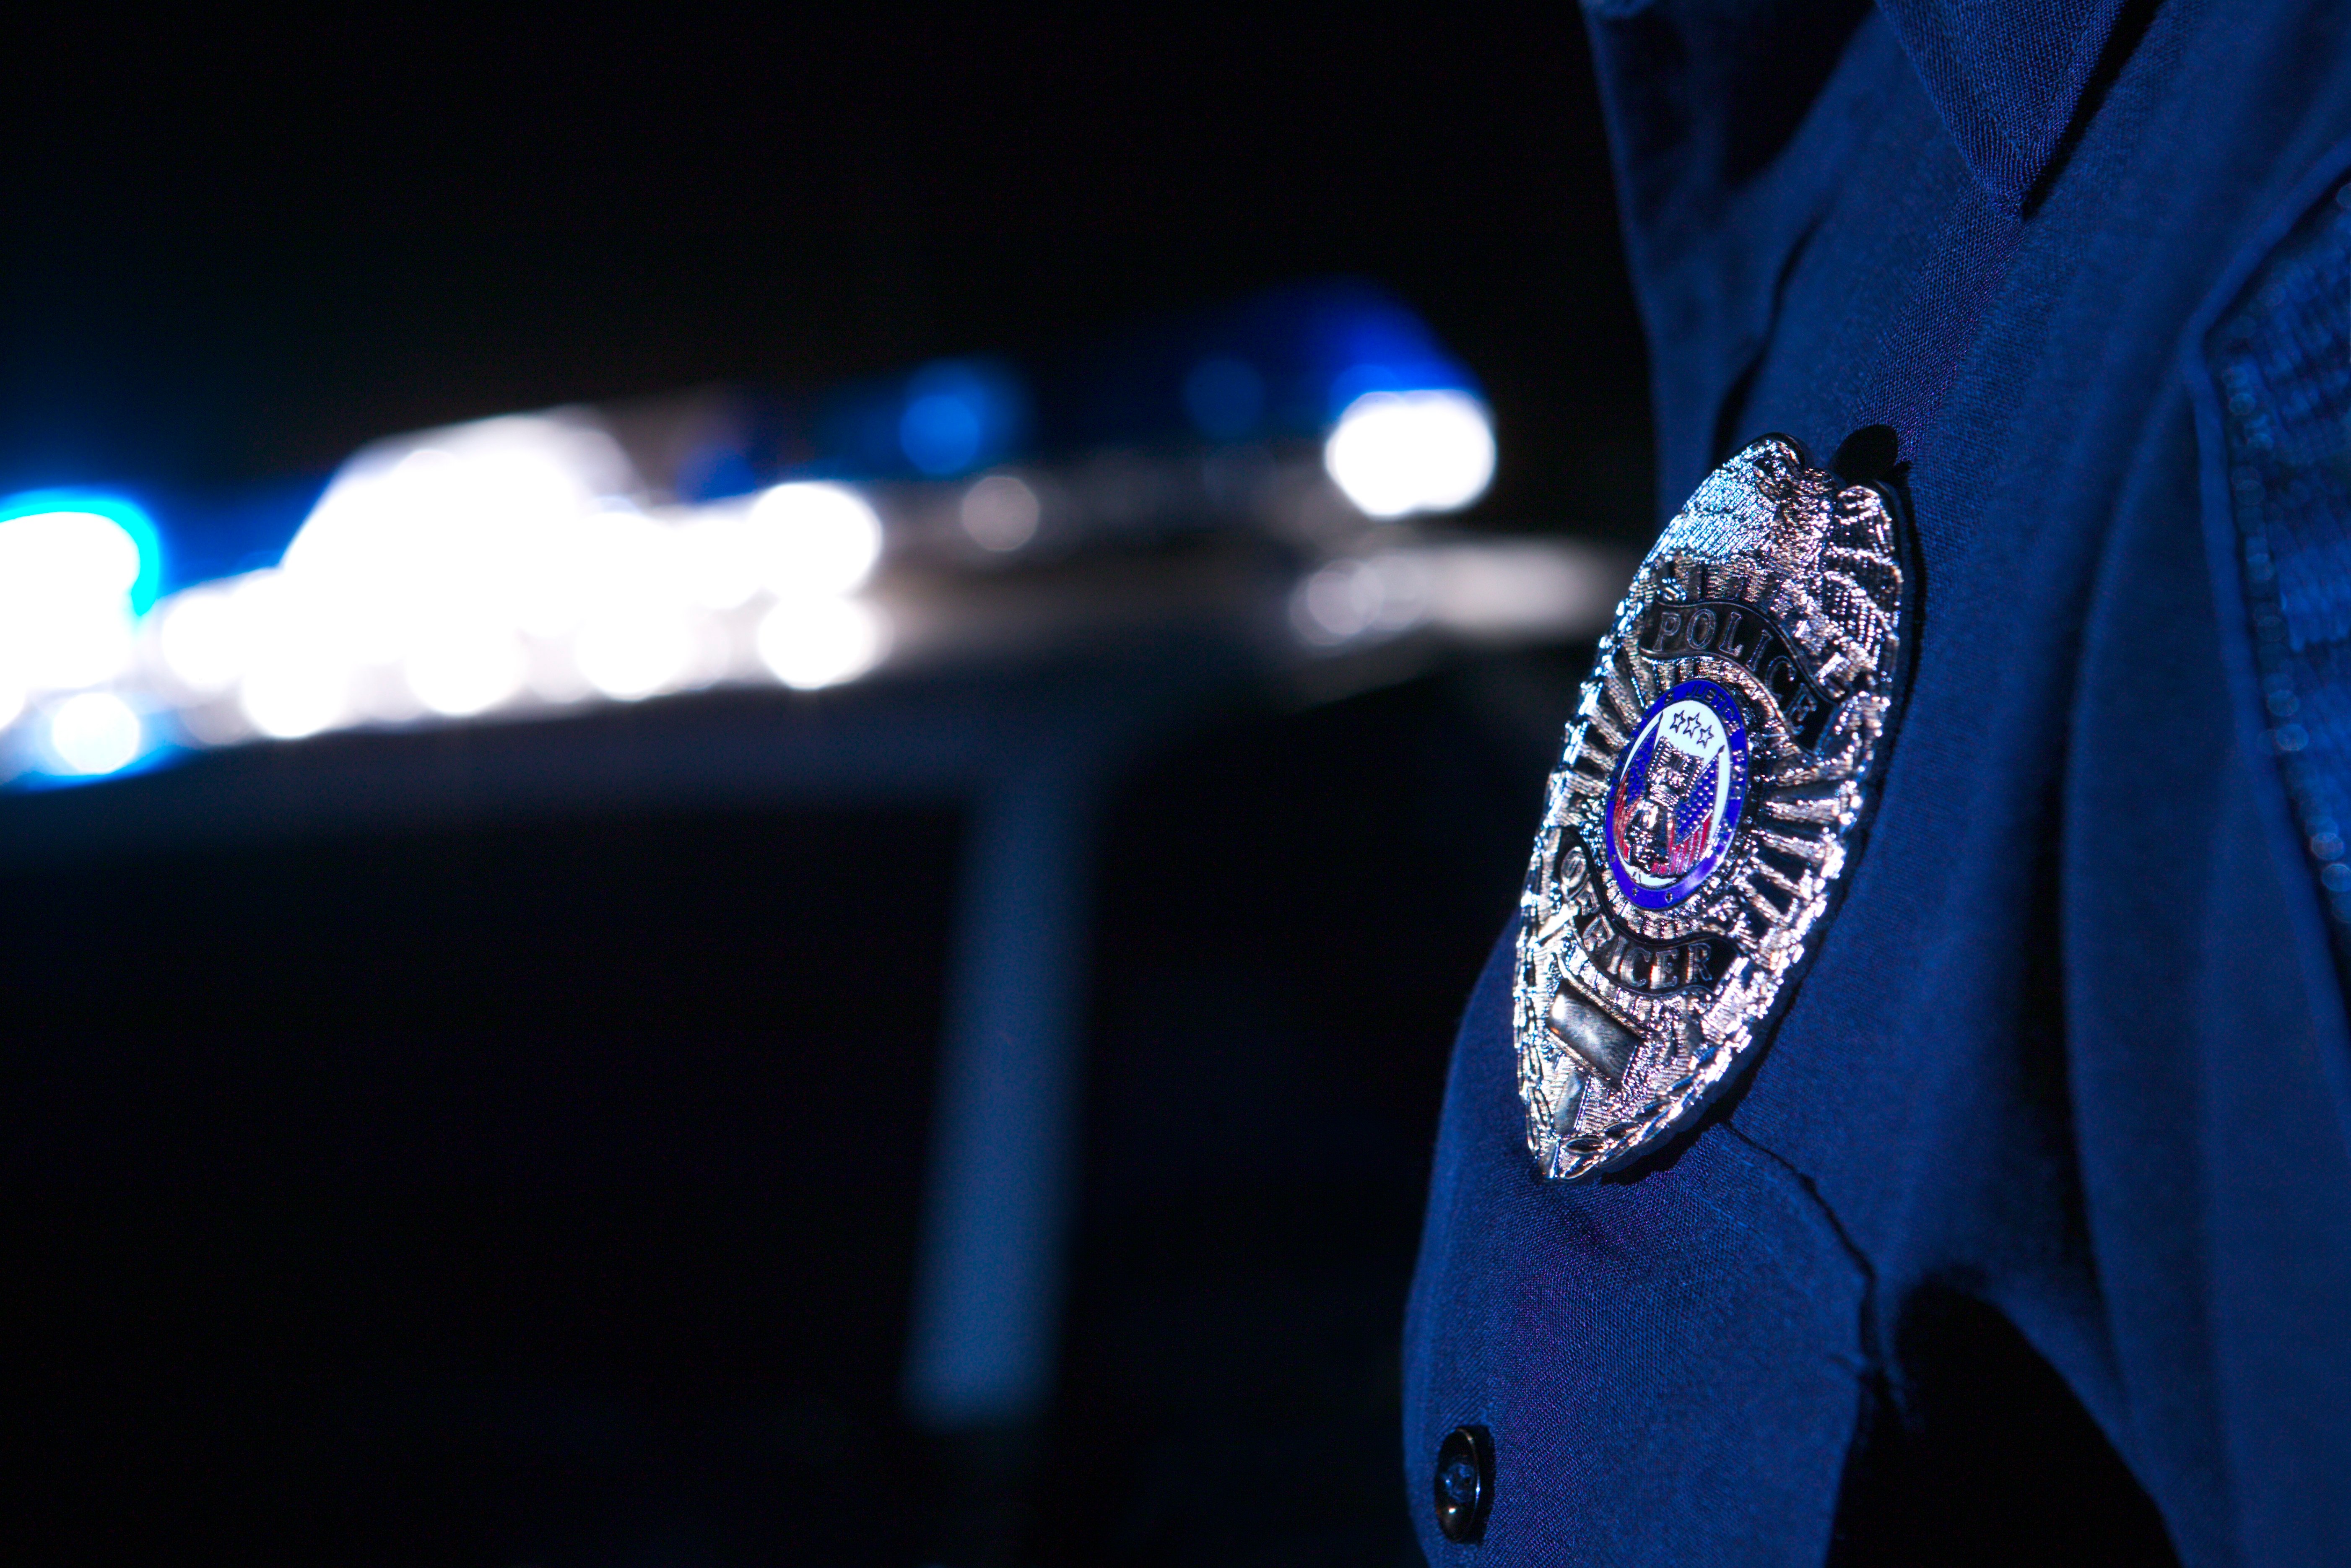 Closeup of police officers badge with car in background